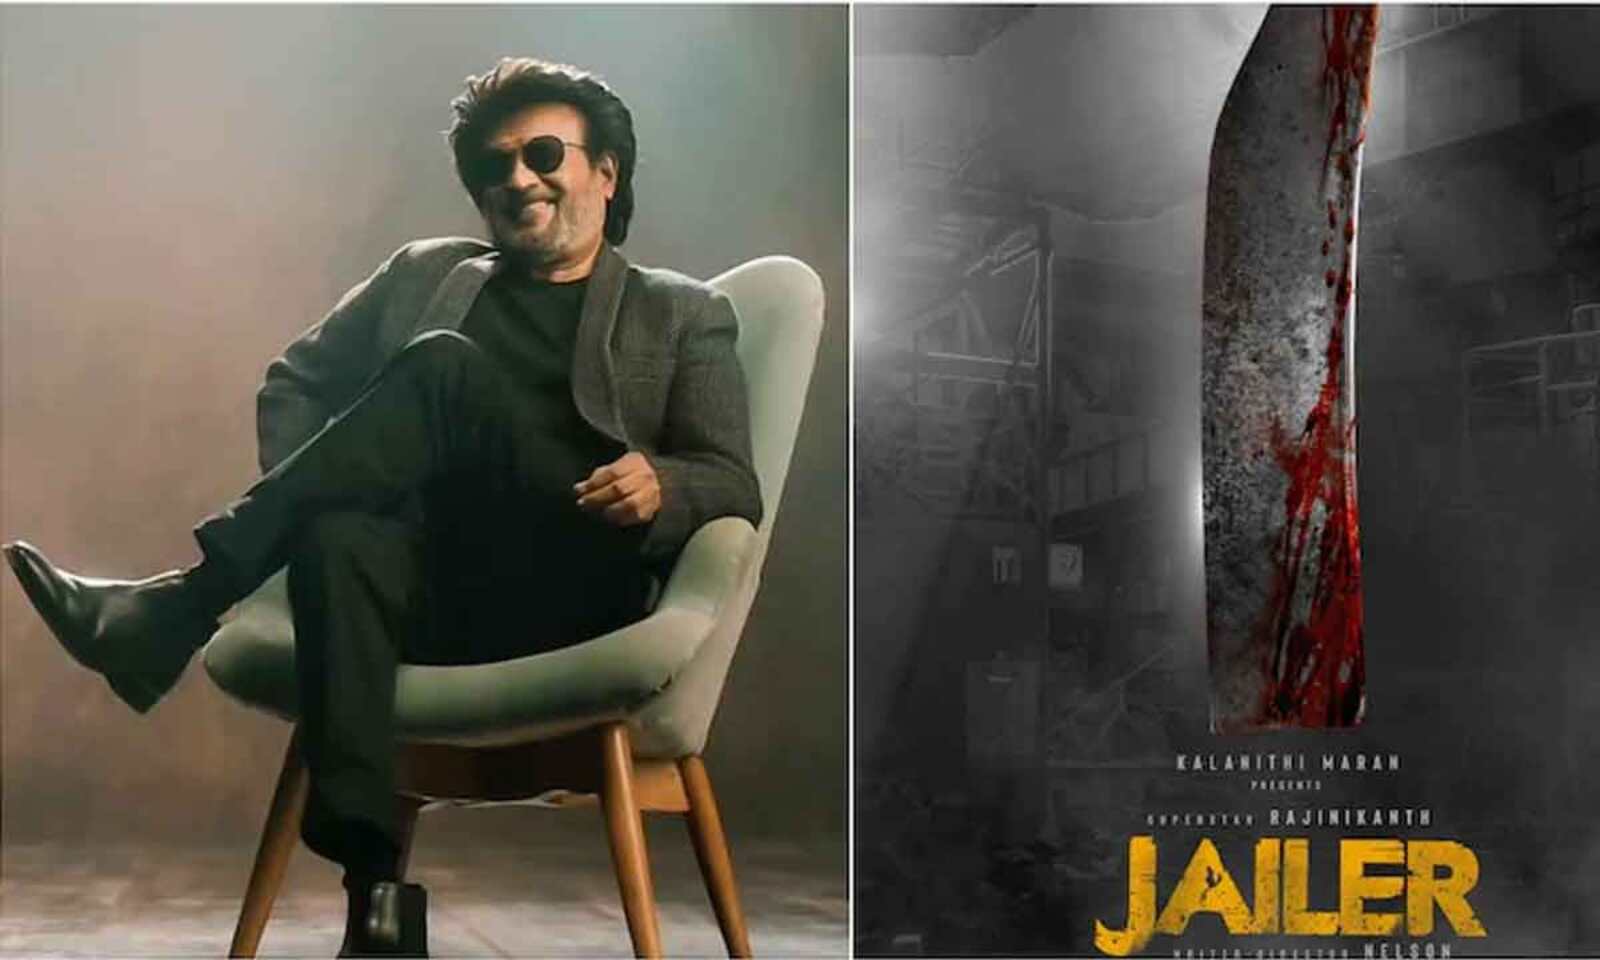 Rajinikanth film remains steady as it collects Rs 319 crore in India in 19 days